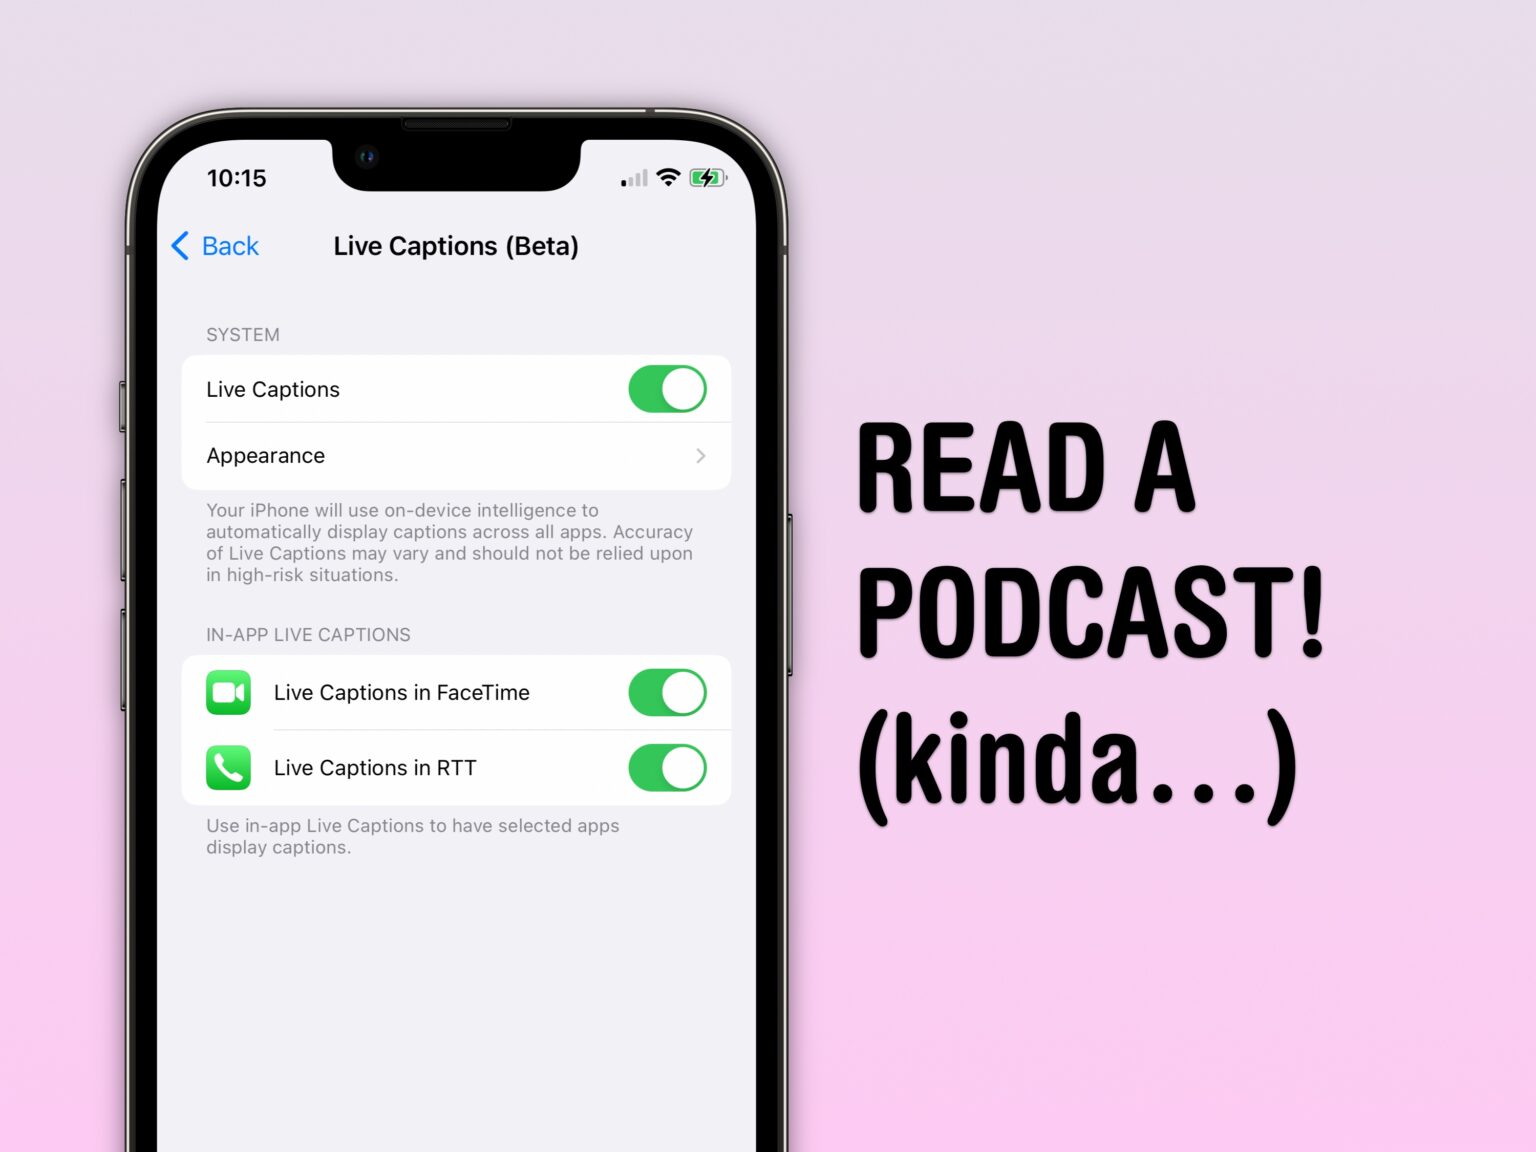 Live Captions will let you read a podcast! …kinda.